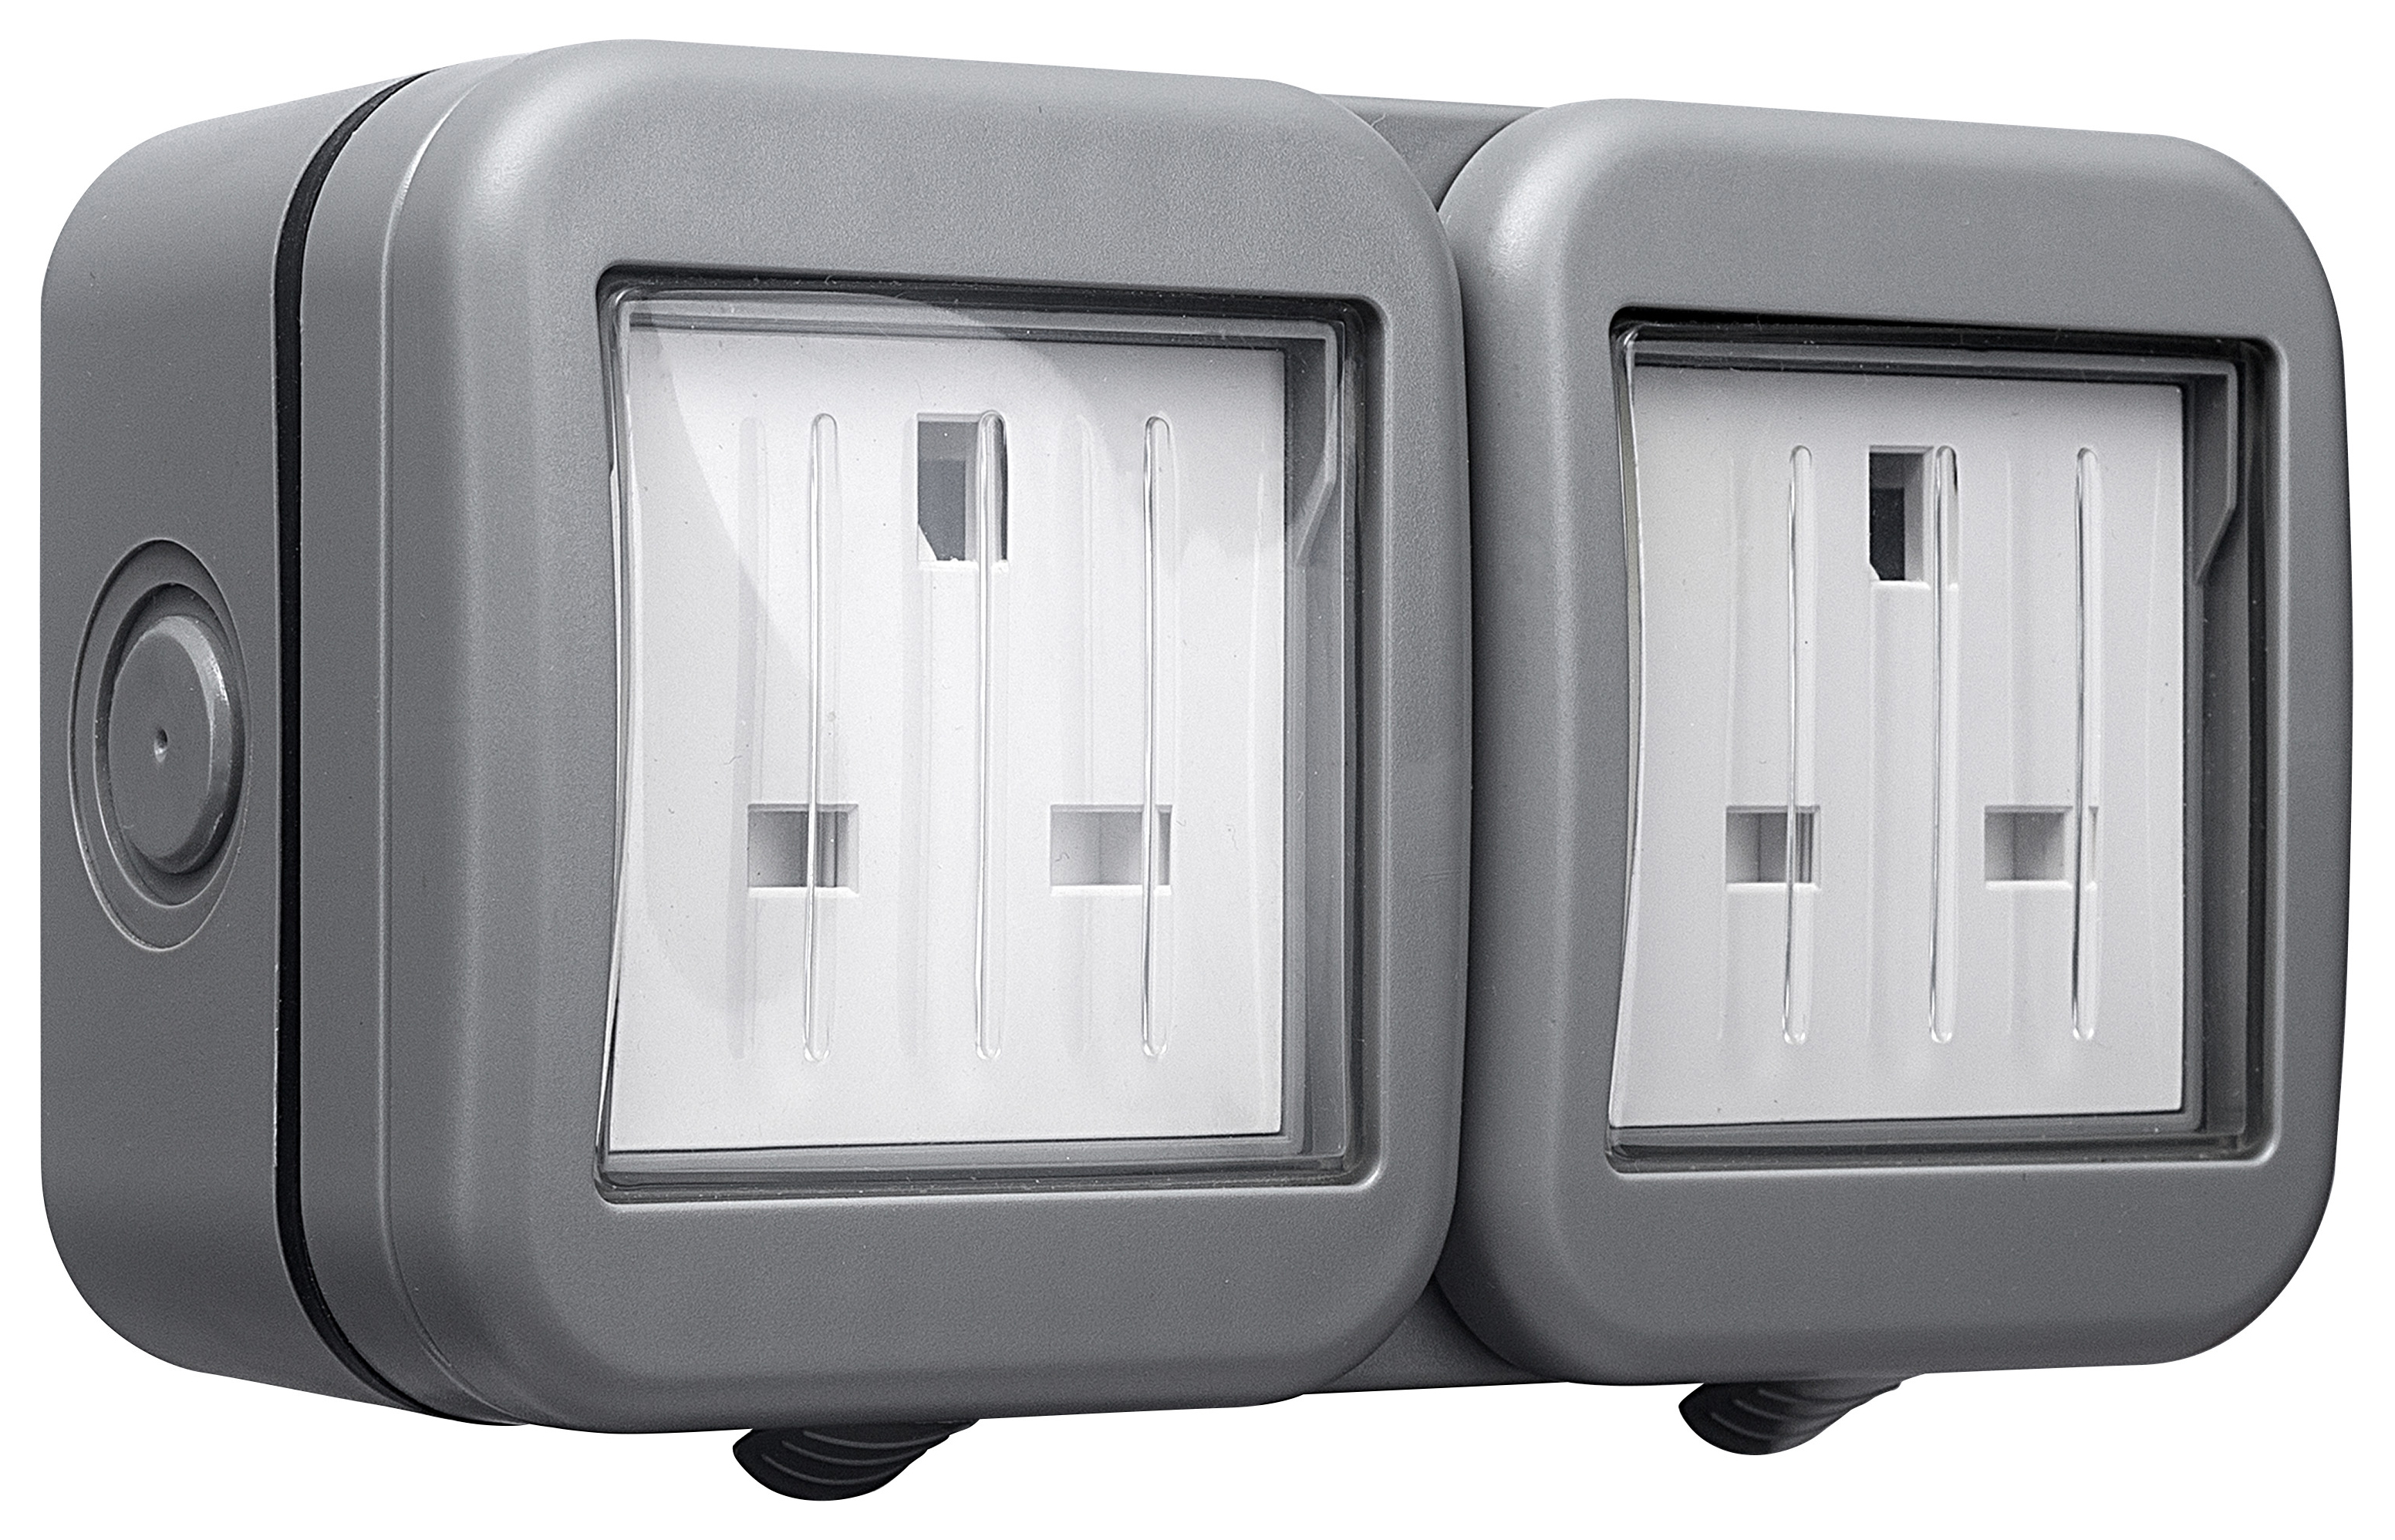 Masterplug 13A Twin Exterior Unswitched Socket - Grey